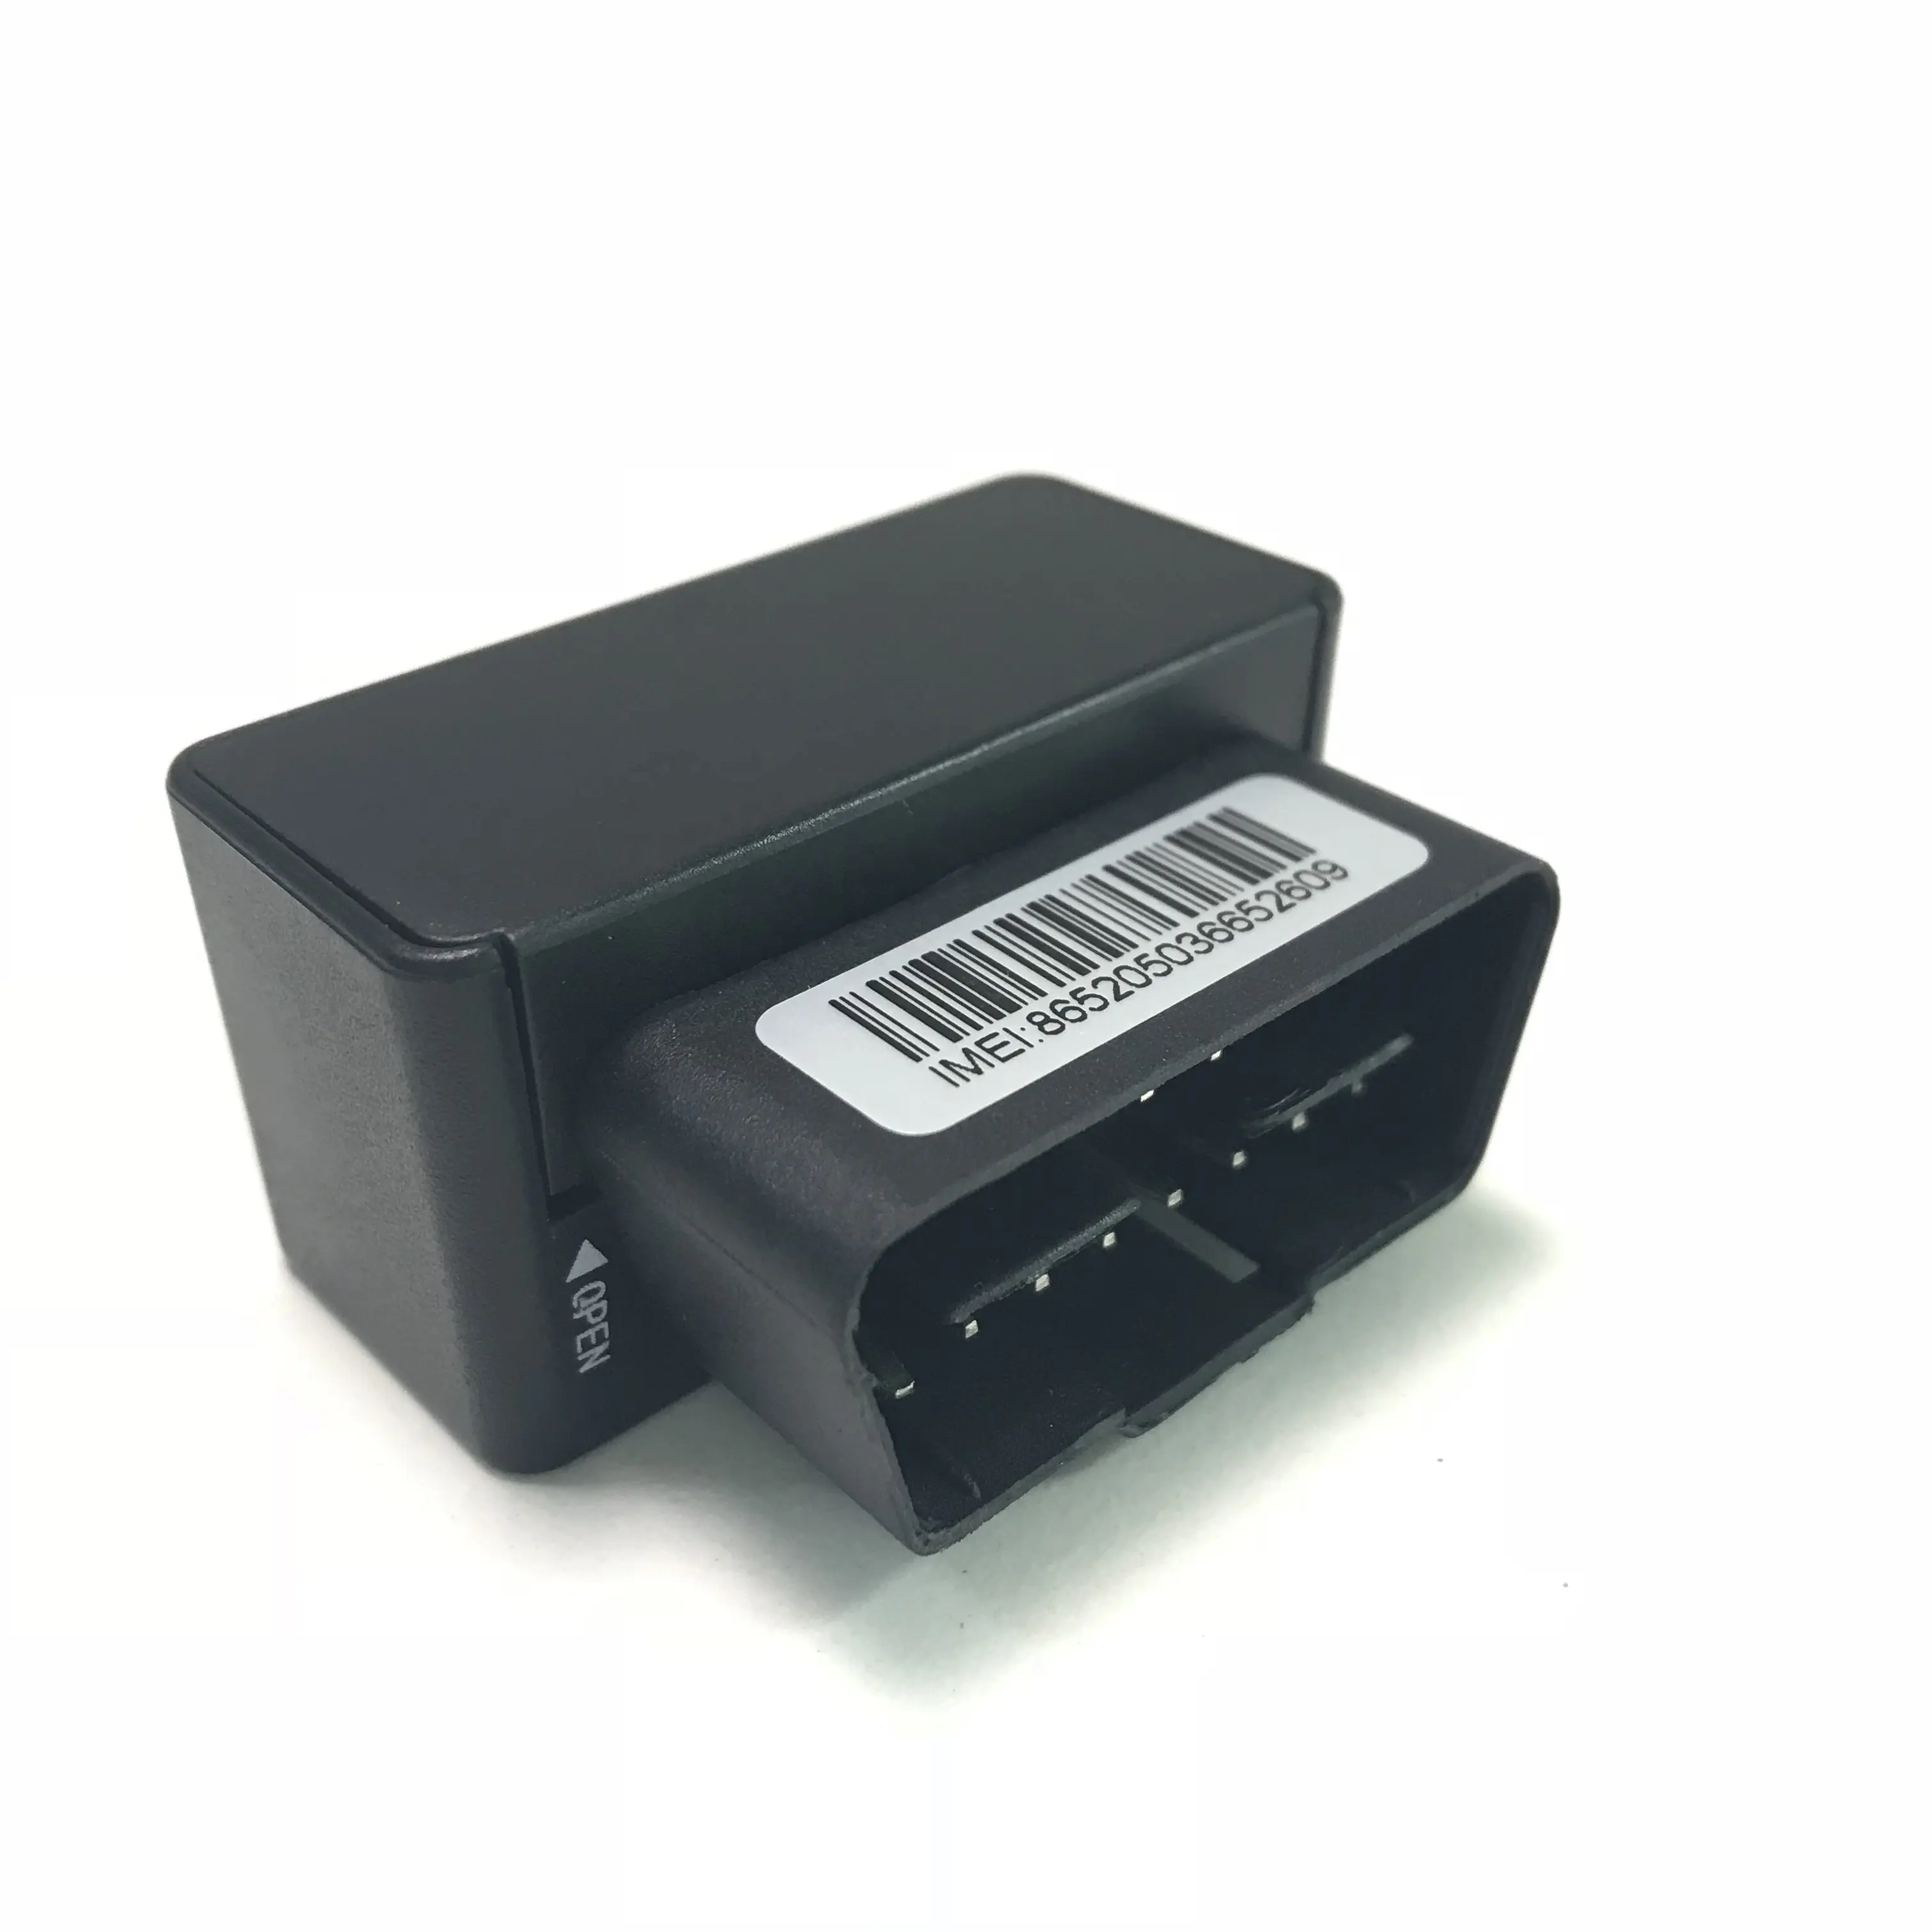 G500M obd gps tracking device G500M Hot sale factory direct OBD gps tracking car obd2 gps tracking device